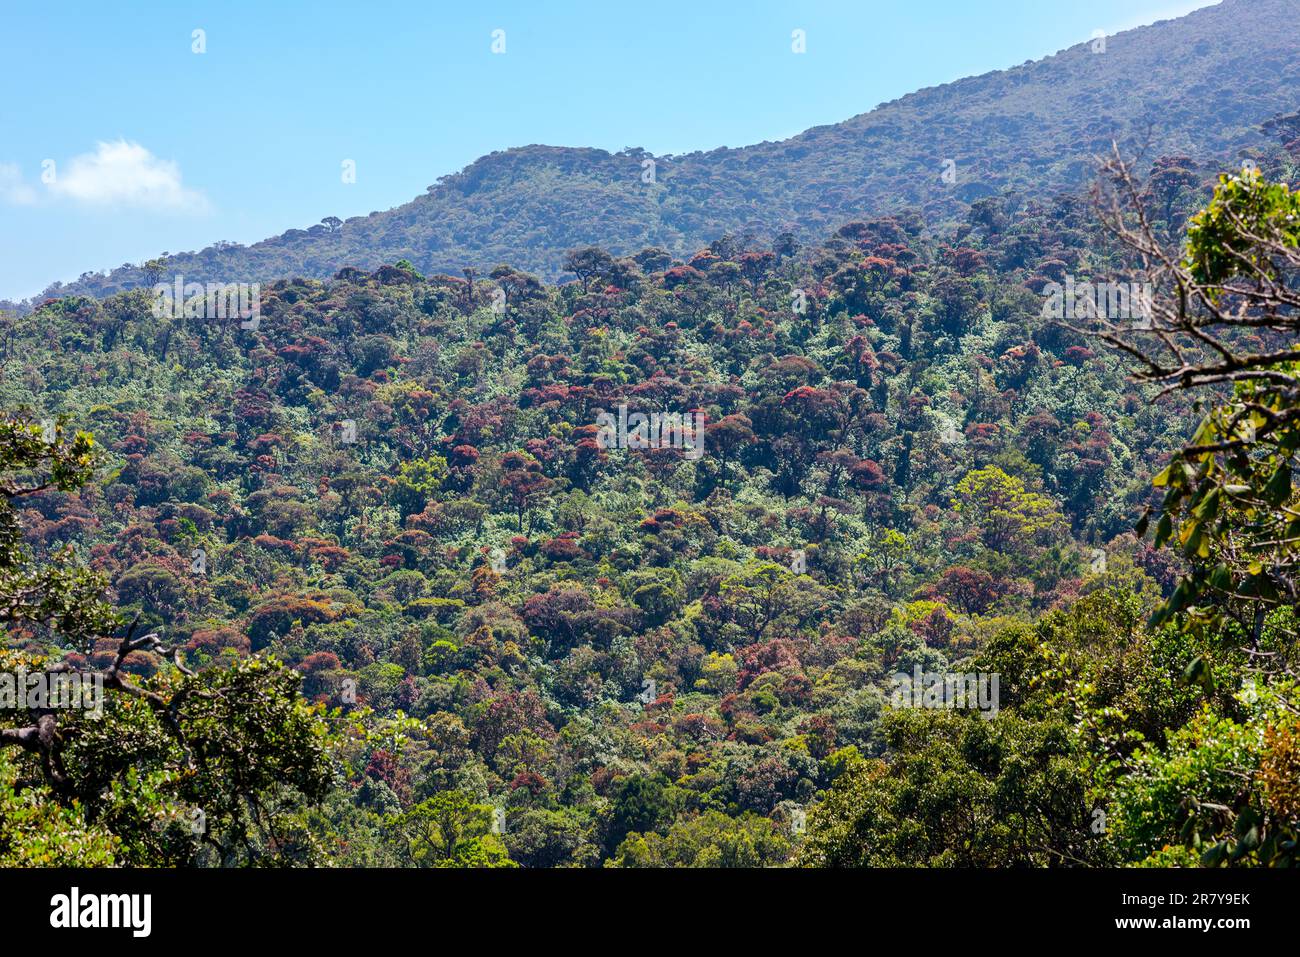 The Sri Lanka dry-zone dry evergreen forests are a tropical dry broadleaf forest ecoregion of the island of Sri Lanka. Situated mostly in the Central Stock Photo